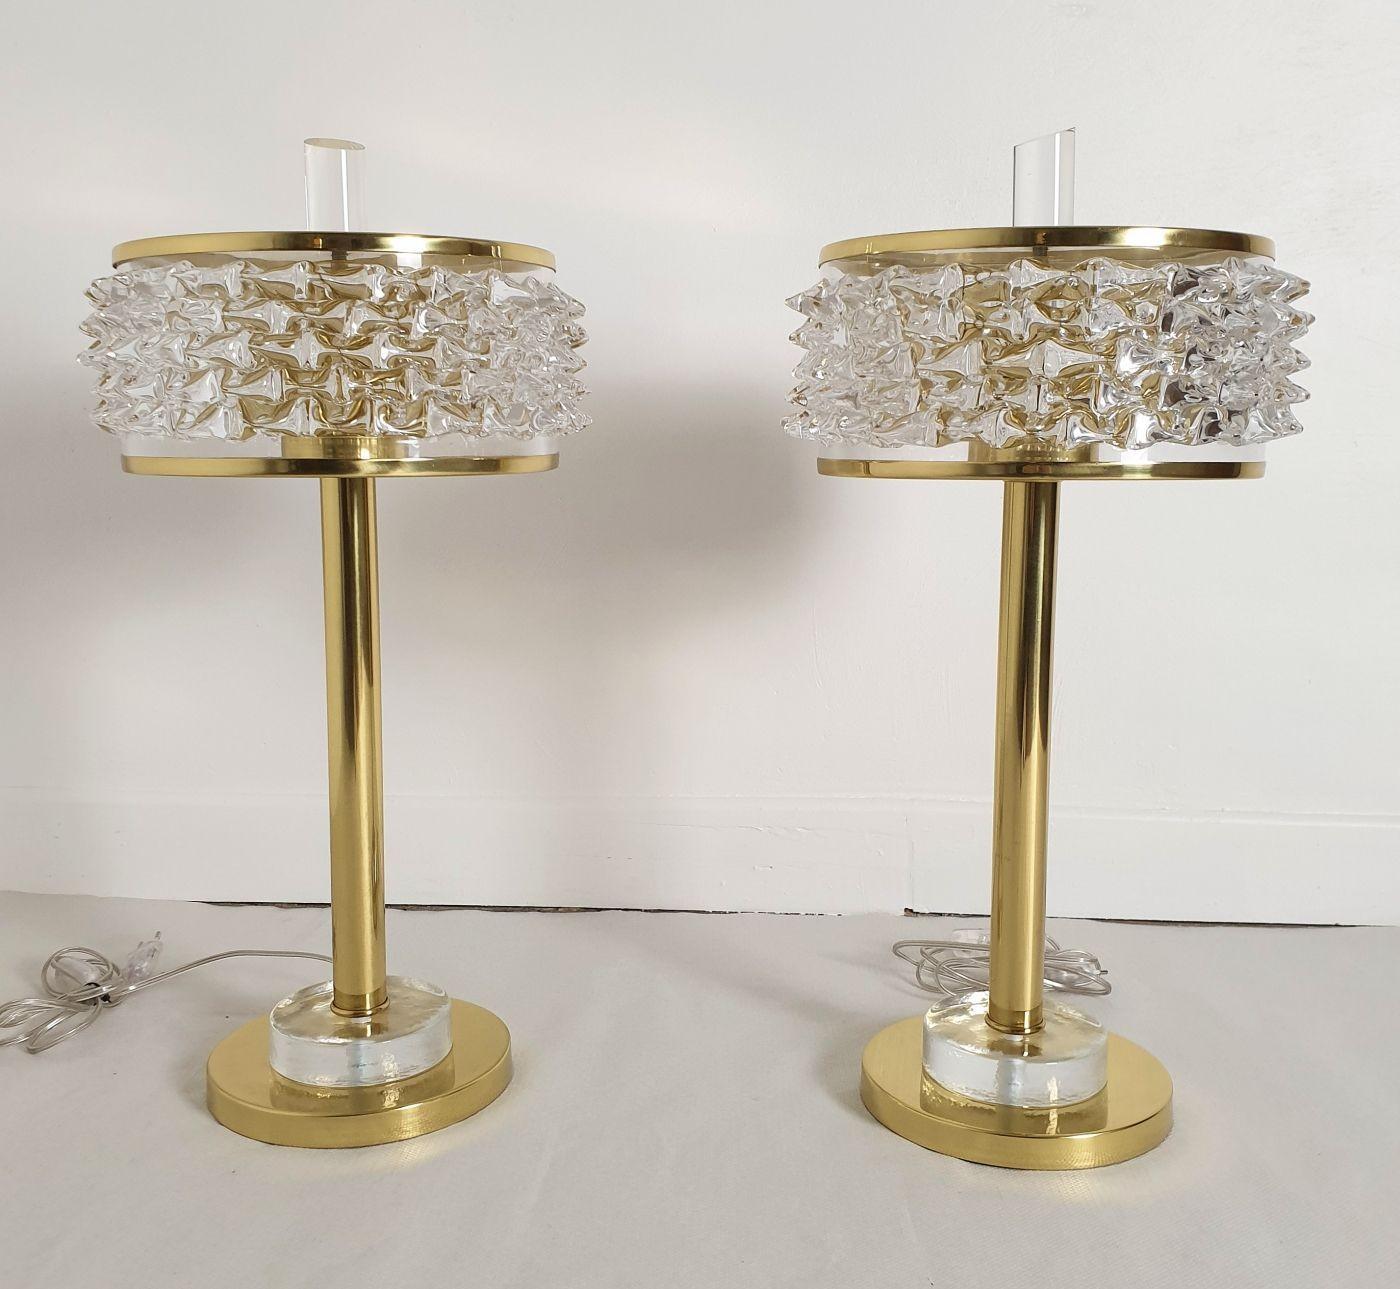 Pair of Mid-Century Modern table or desk lamps, Italy 1970s.
The lamps are made of polished brass and translucent very thick handmade Rostrato Murano glass shades.
The diameter of the base is: 7.87 in.
The diameter of the shade is: 13.38 in.
Each